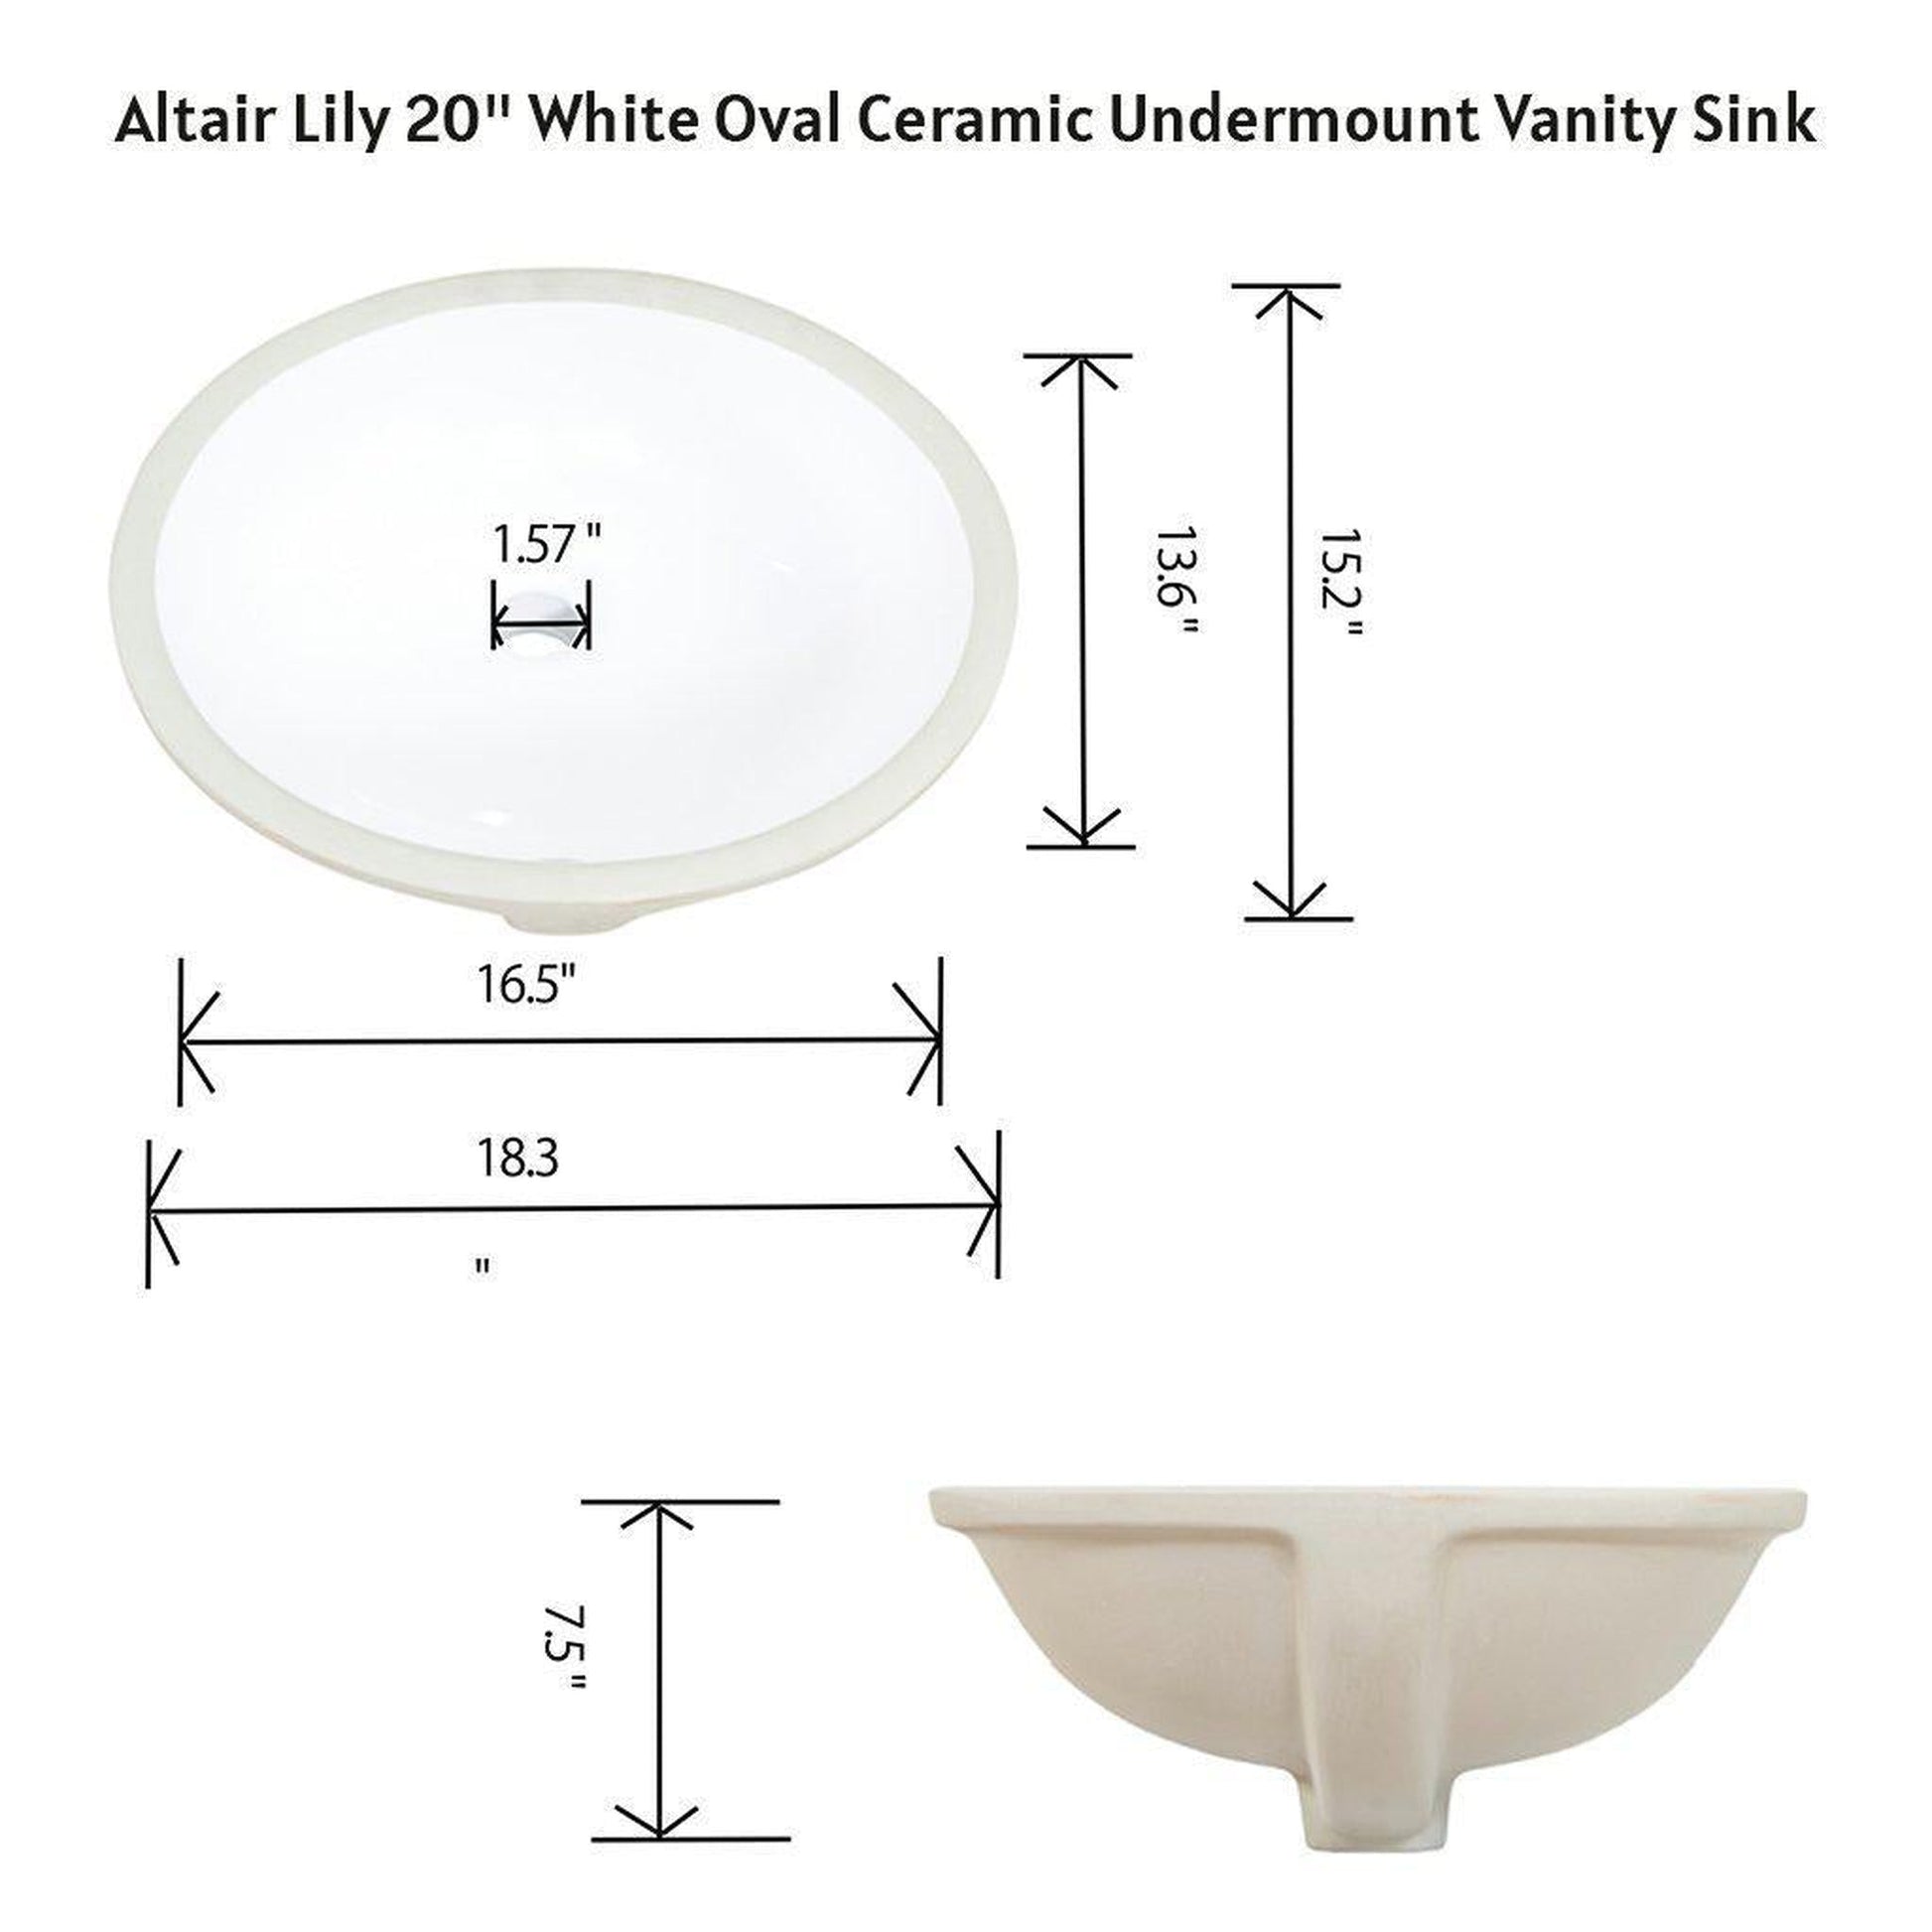 Altair Lily 20" Oval White Ceramic Undermount Sink